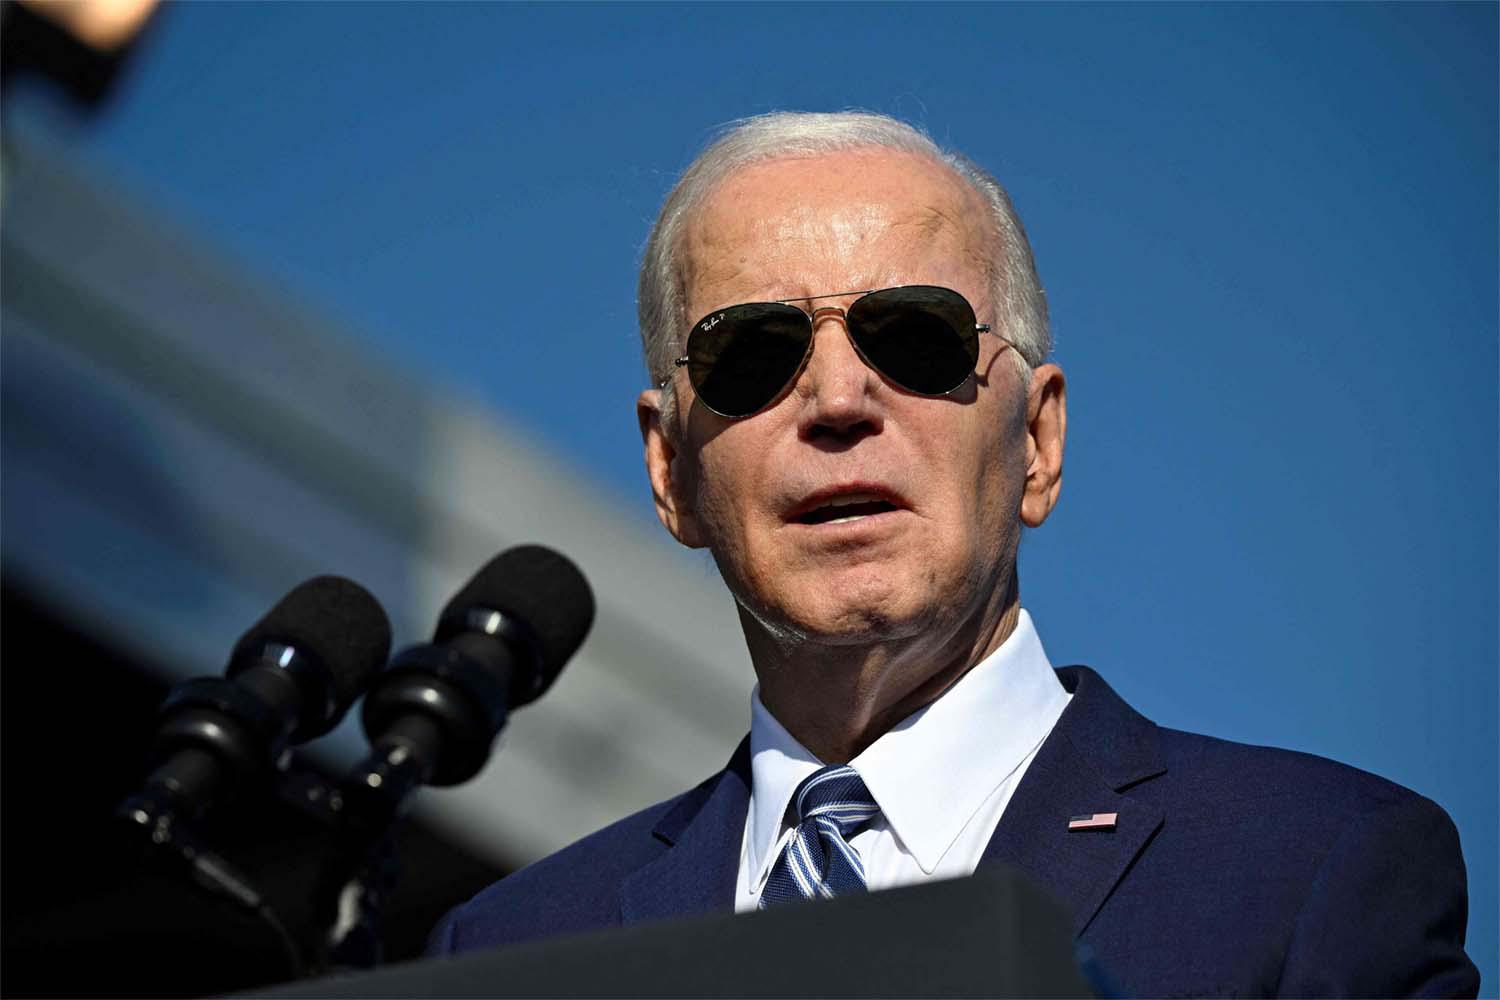 Biden will then fly to Amman for talks about accelerating humanitarian assistance to Gaza